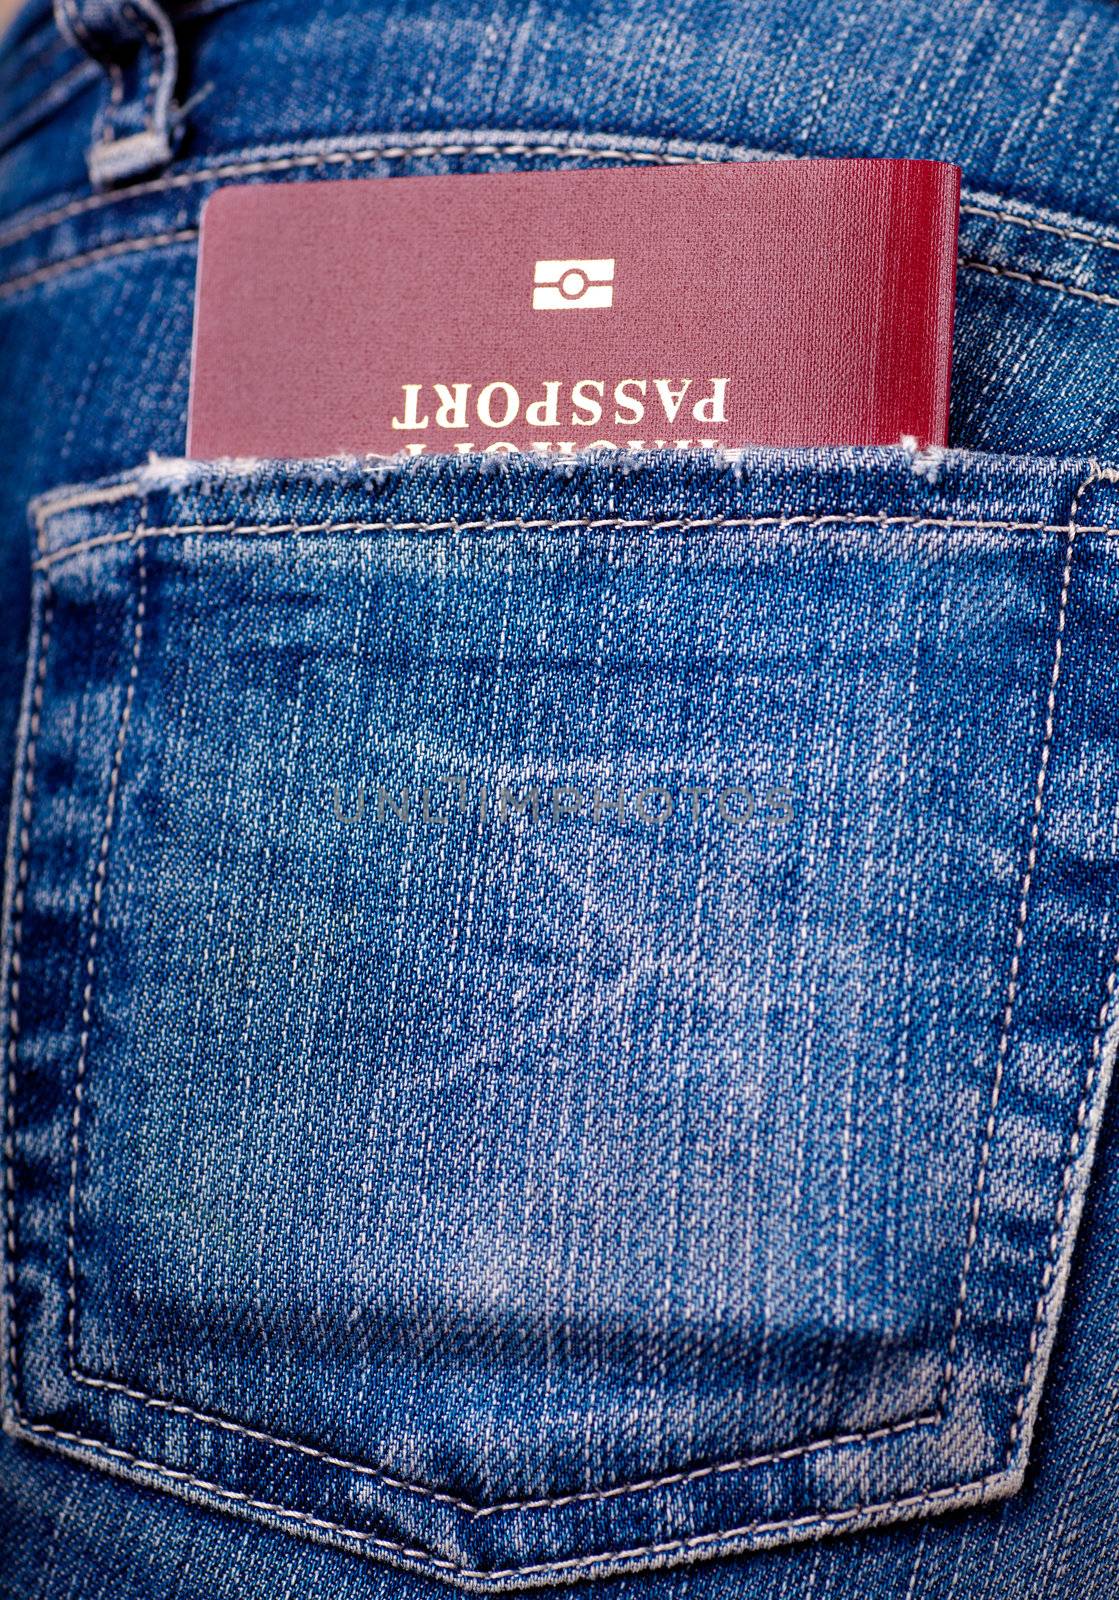 Passport in a pocket by AGorohov